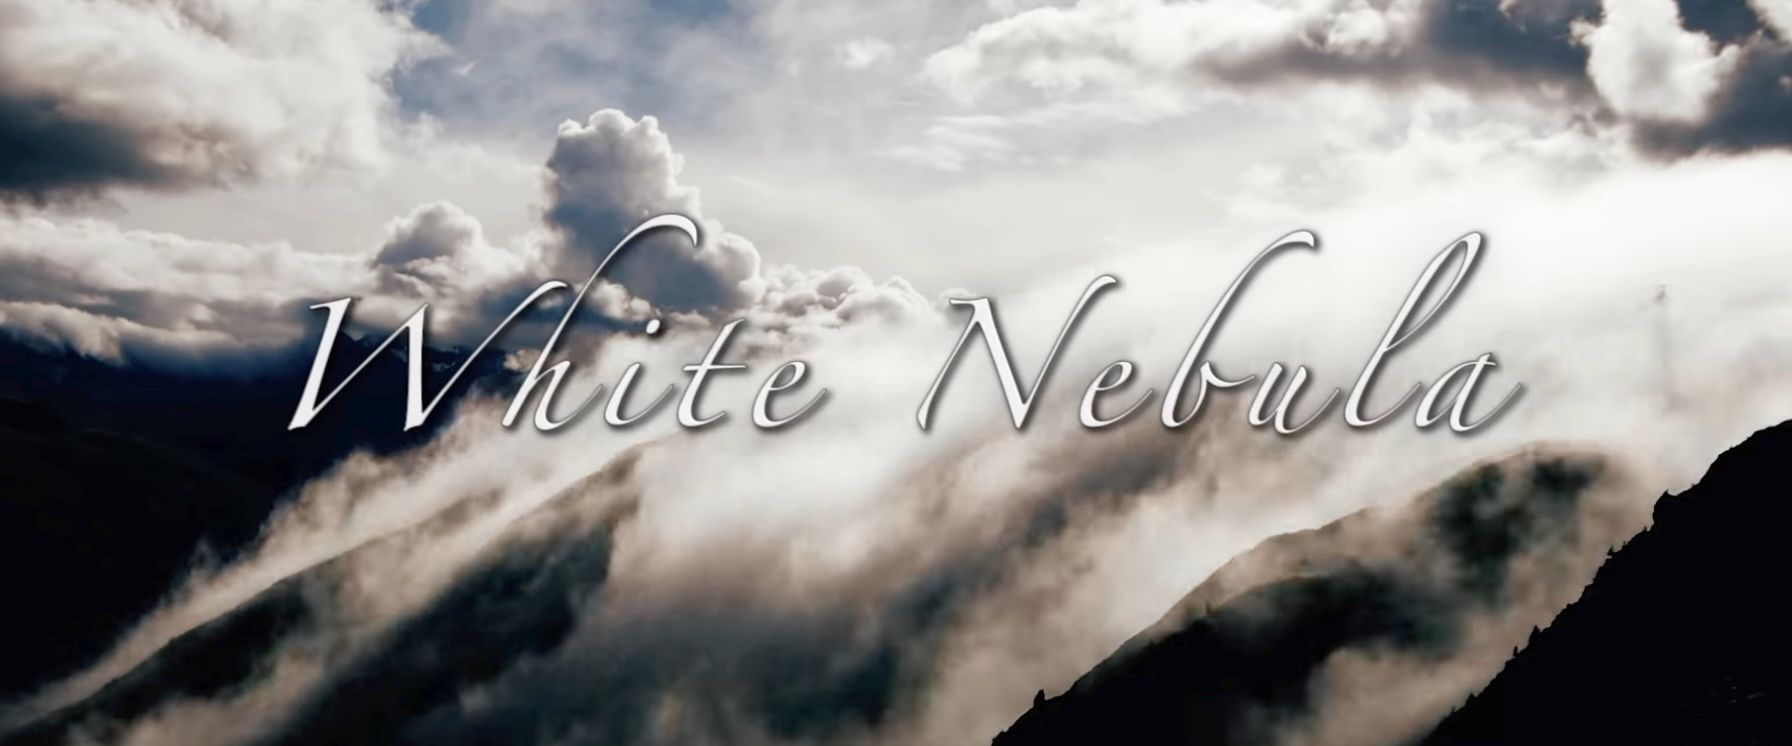 Wreck of Time - Chapter 9 - White Nebula